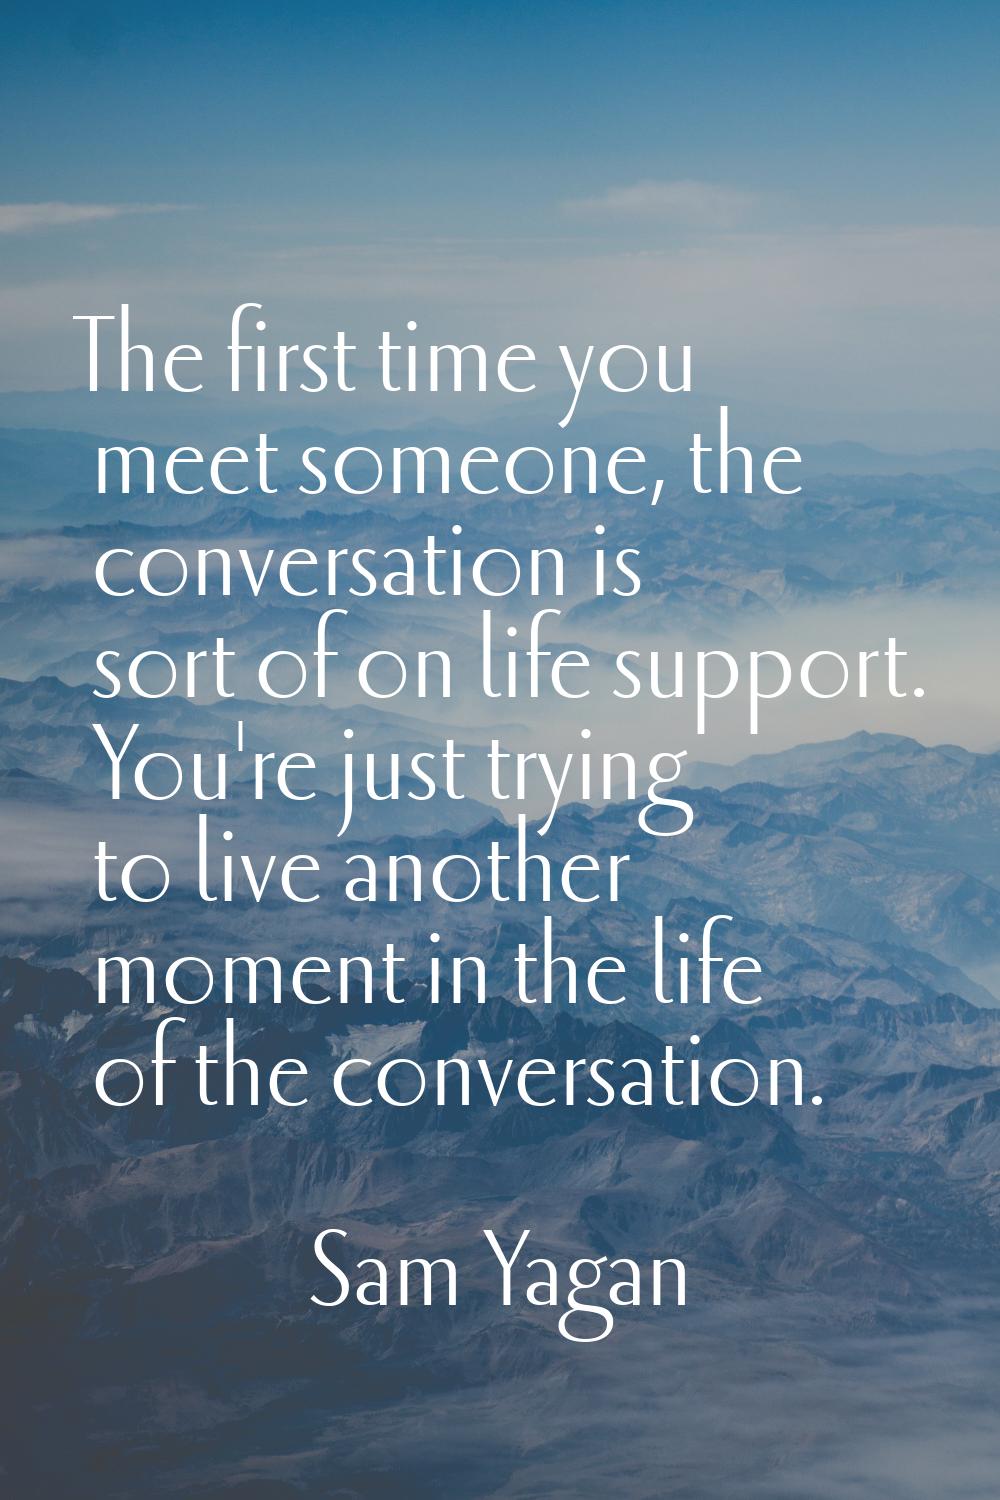 The first time you meet someone, the conversation is sort of on life support. You're just trying to